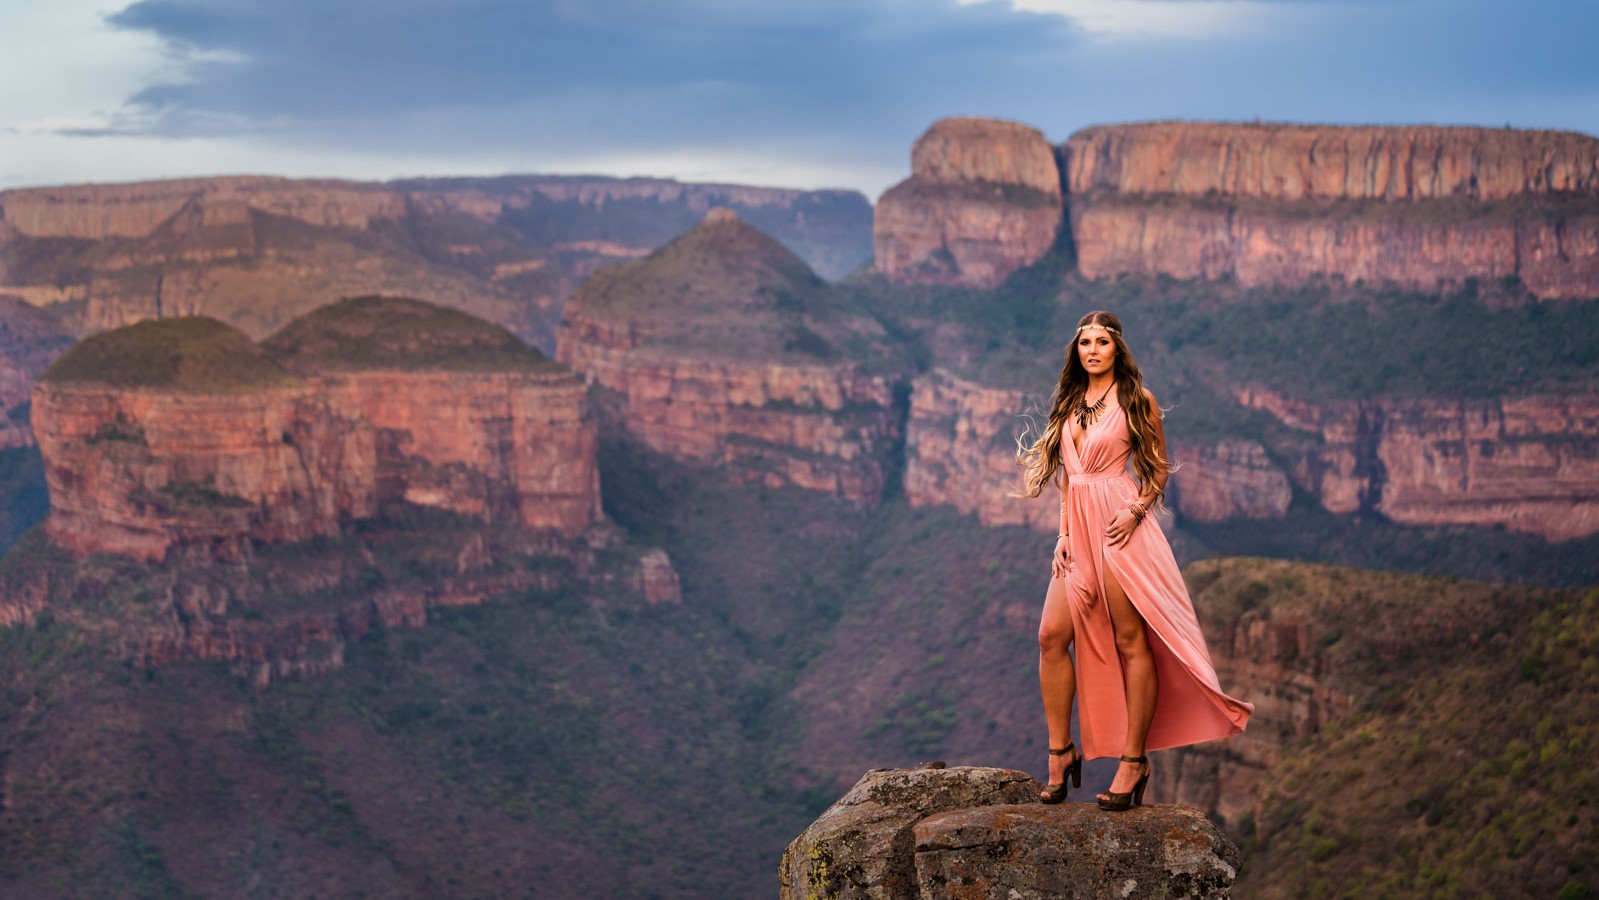 music-video-cover-cecilia-kallin-photo-jesper-anhede-south-africa